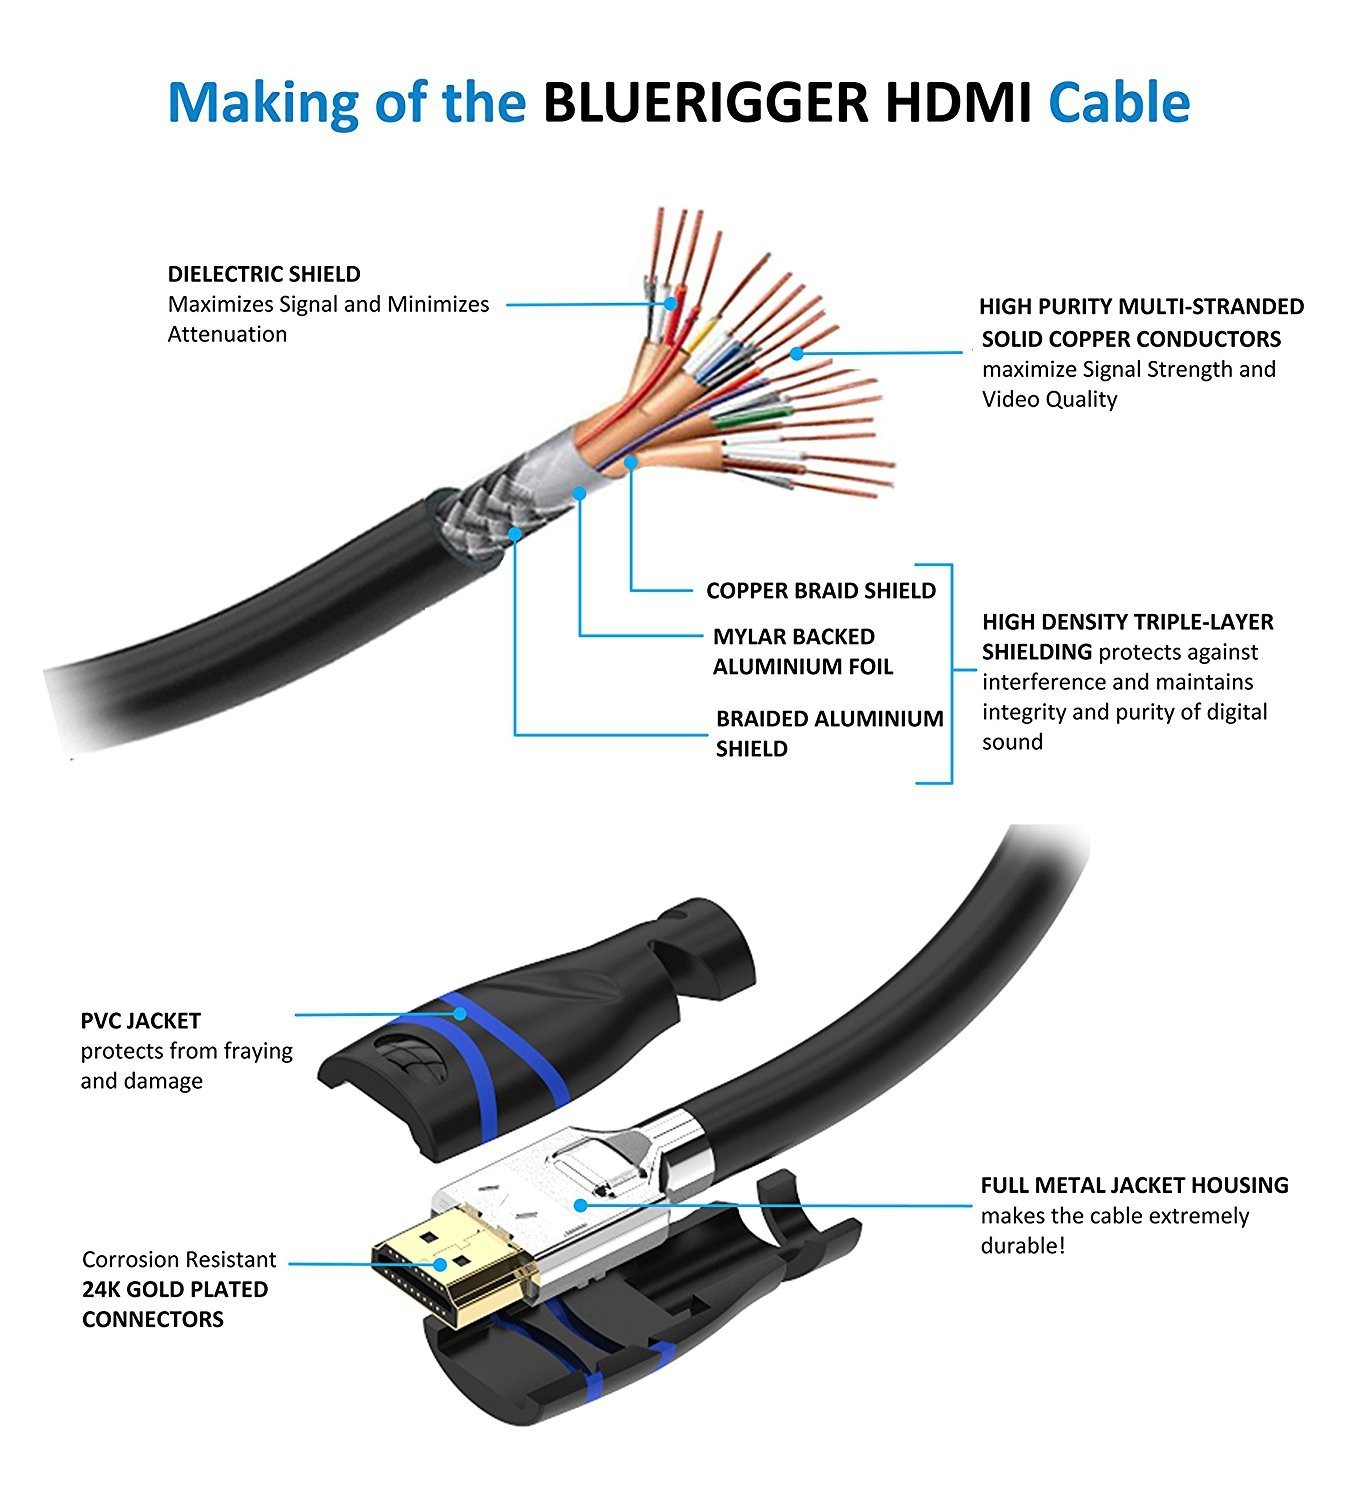 Wiring Diagram Vga To Hdmi New Great Hdmi To Rca Cable Wiring Diagram Gallery Electrical And New Hdmi Wiring Diagram Awesome Hdmi Cable Wiring Diagram Life